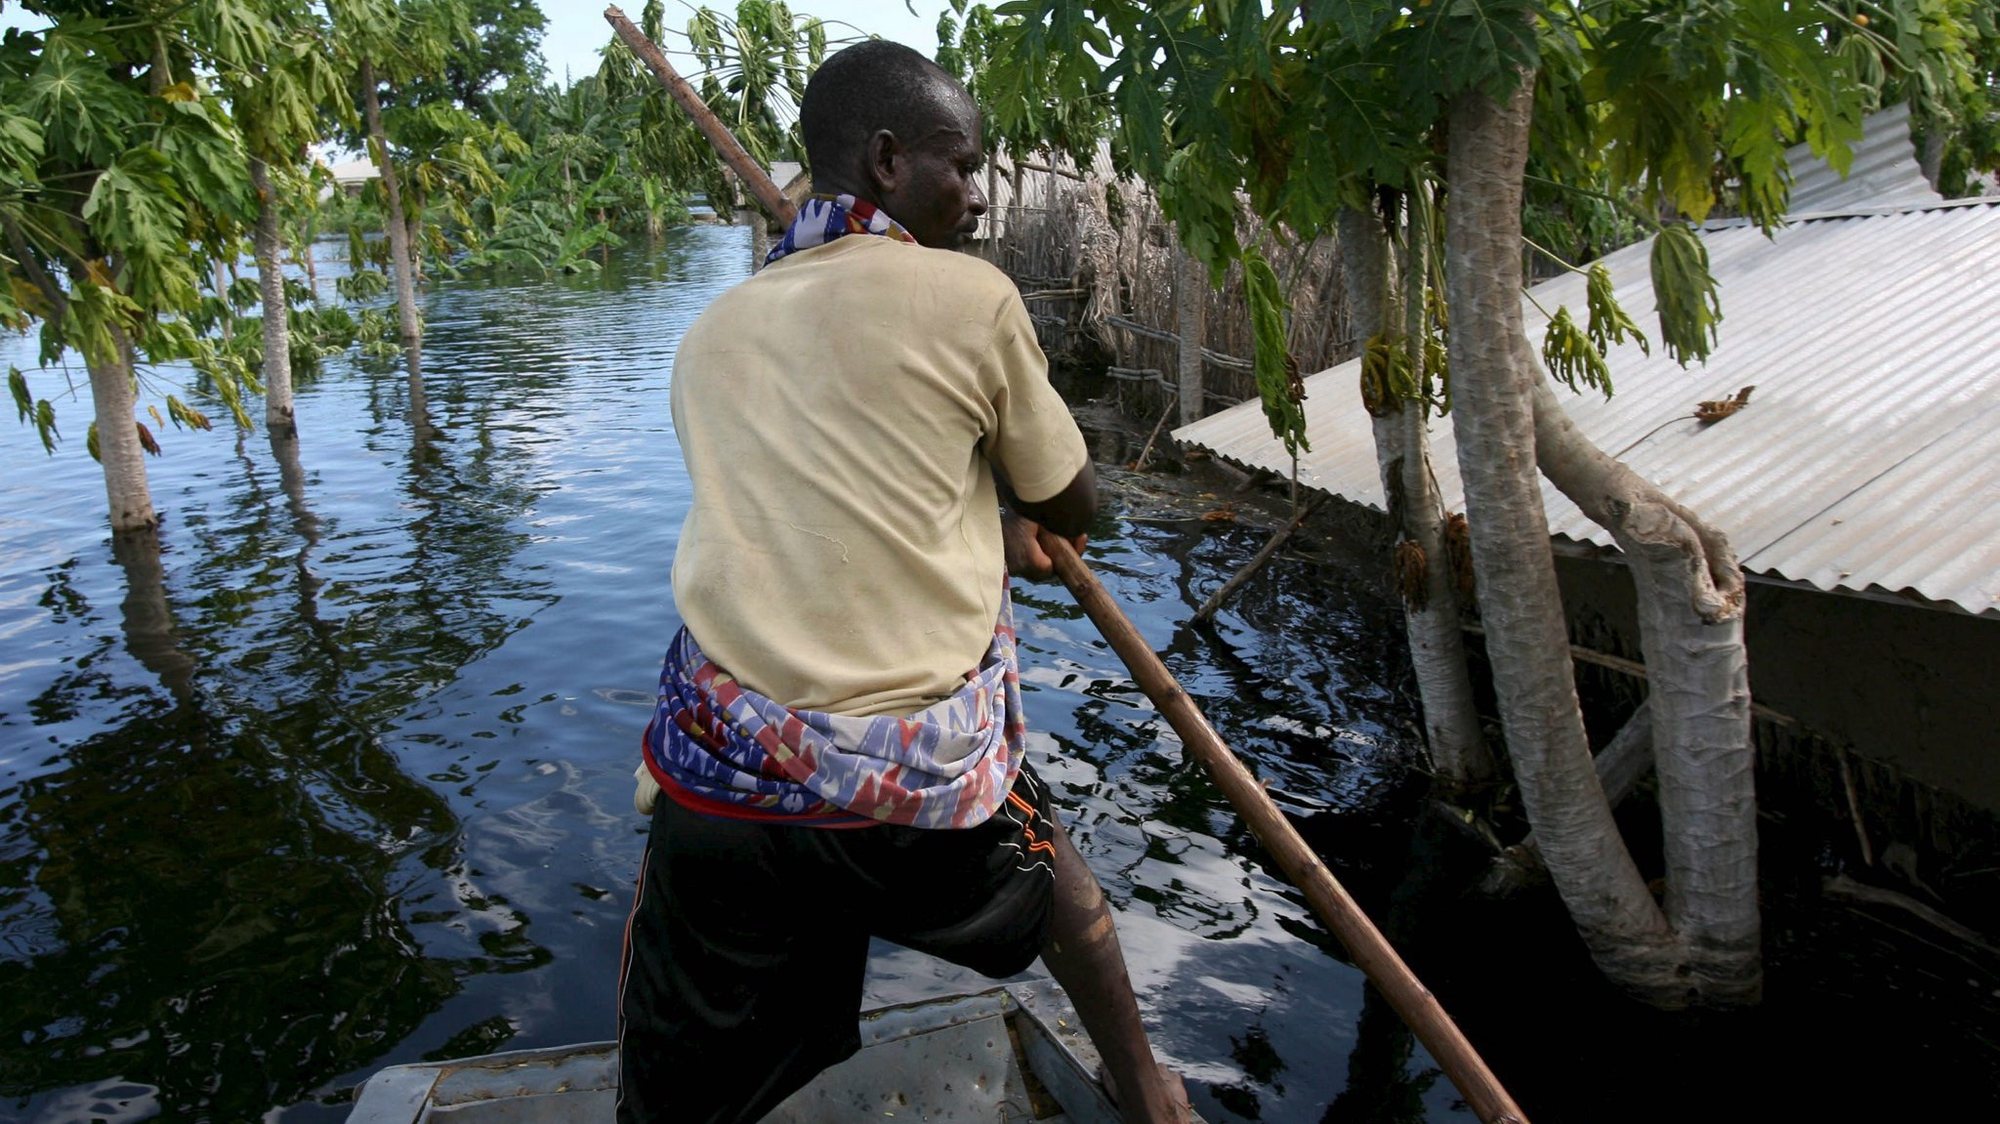 epa00879100 A villager steers his boat through a flooded village along the Juba river in southern Somalia near the village of Jamame on Wednesday, 06 December 2006. After years of drought Somalia is suffering from the worst flooding in over 50 years leaving an estimated 120 killed and tens of thousands homeless.  EPA/STEPHEN MORRISON